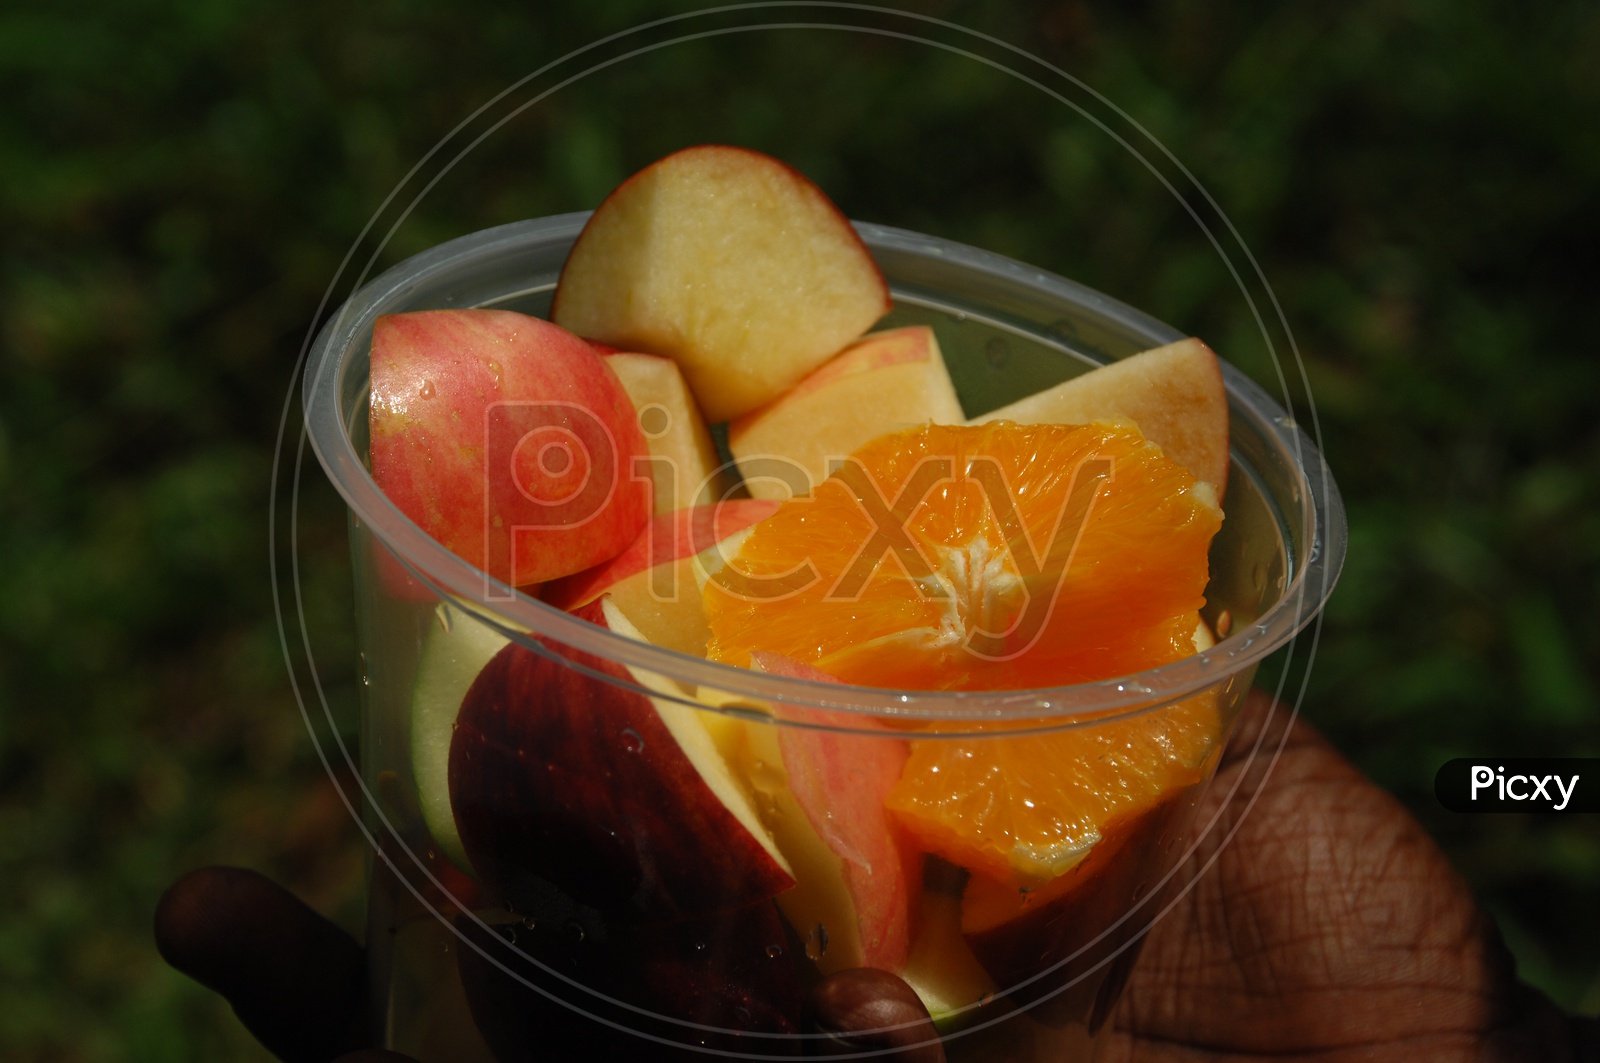 Apple and Orange fruit pieces in a plastic cup